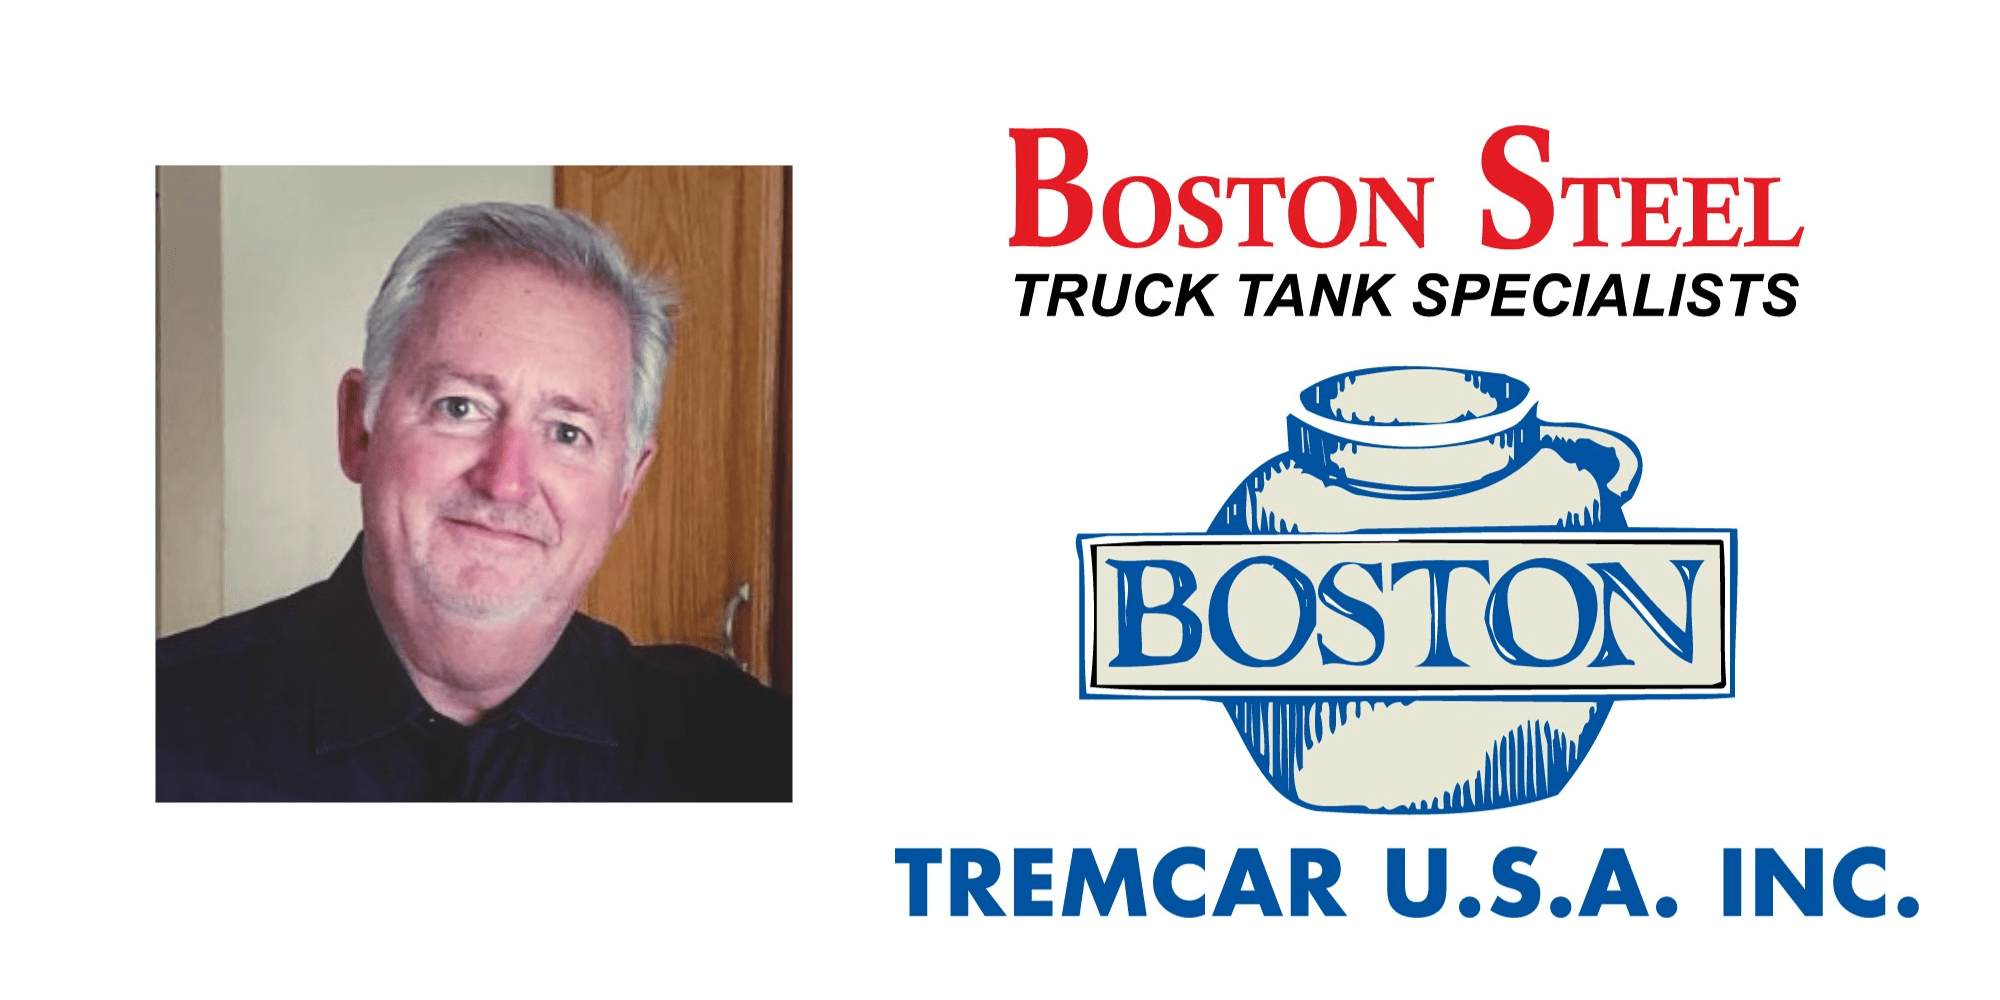 Tremcar appoints sales manager, Tremcar USA recently appointed Peter Garafano as regional sales manager for Haverhill, Mass.-based Boston Steel products, a division of Tremcar.